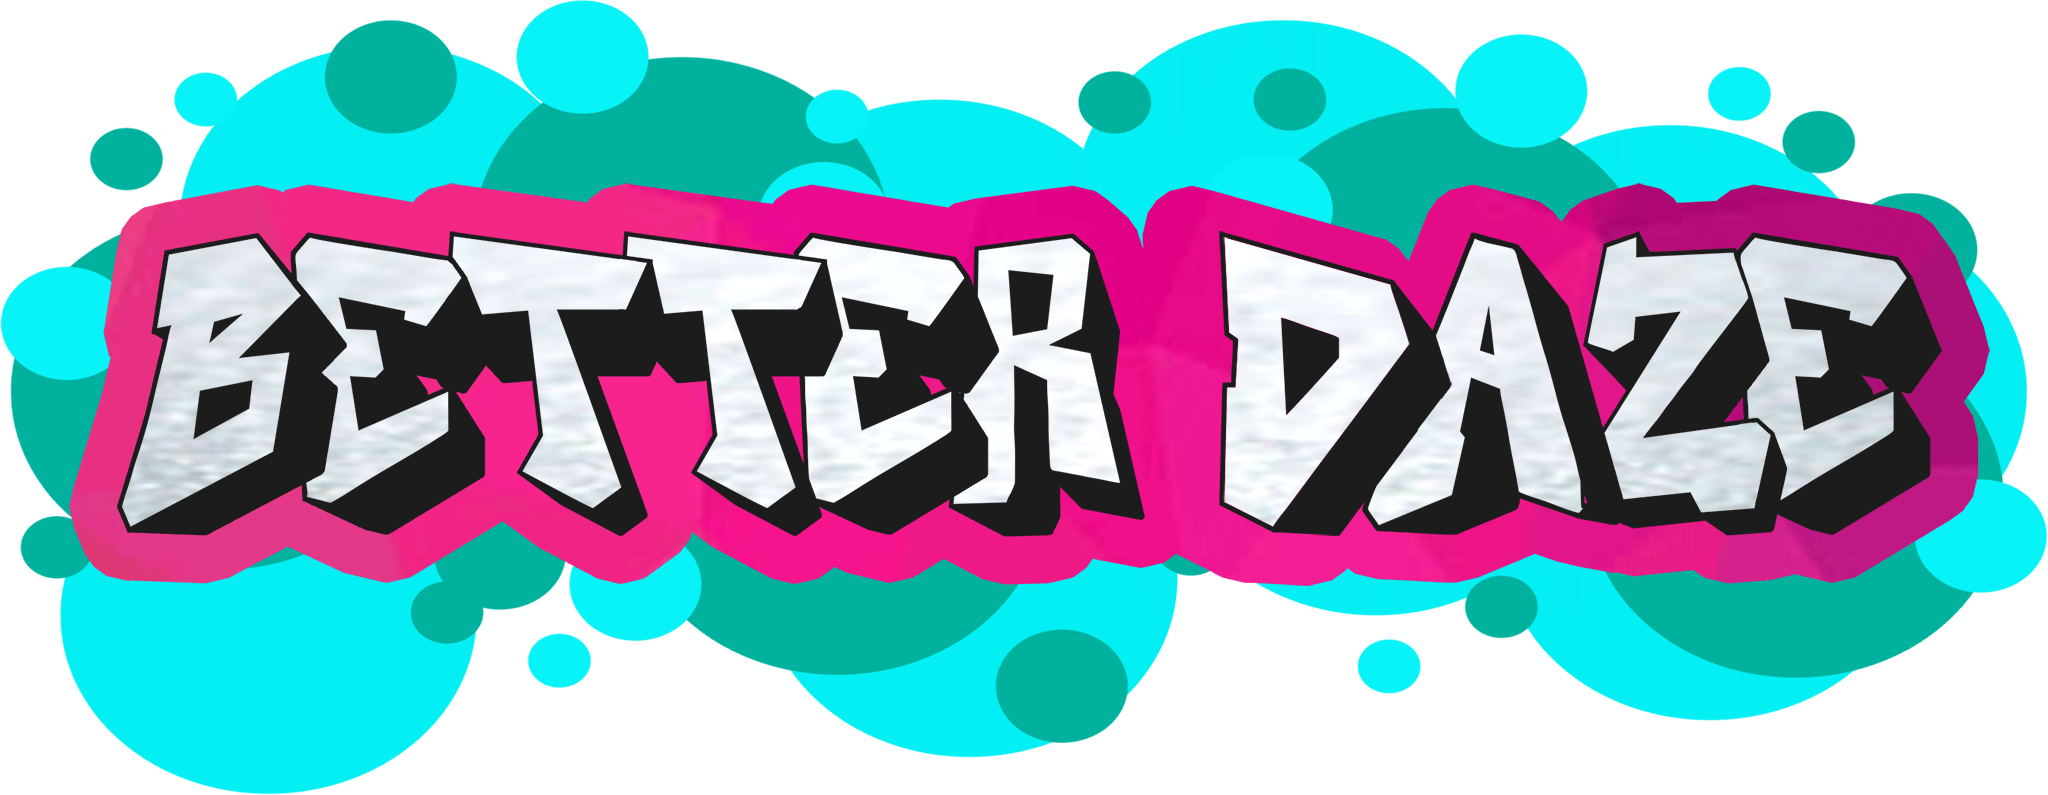 Better days are here!